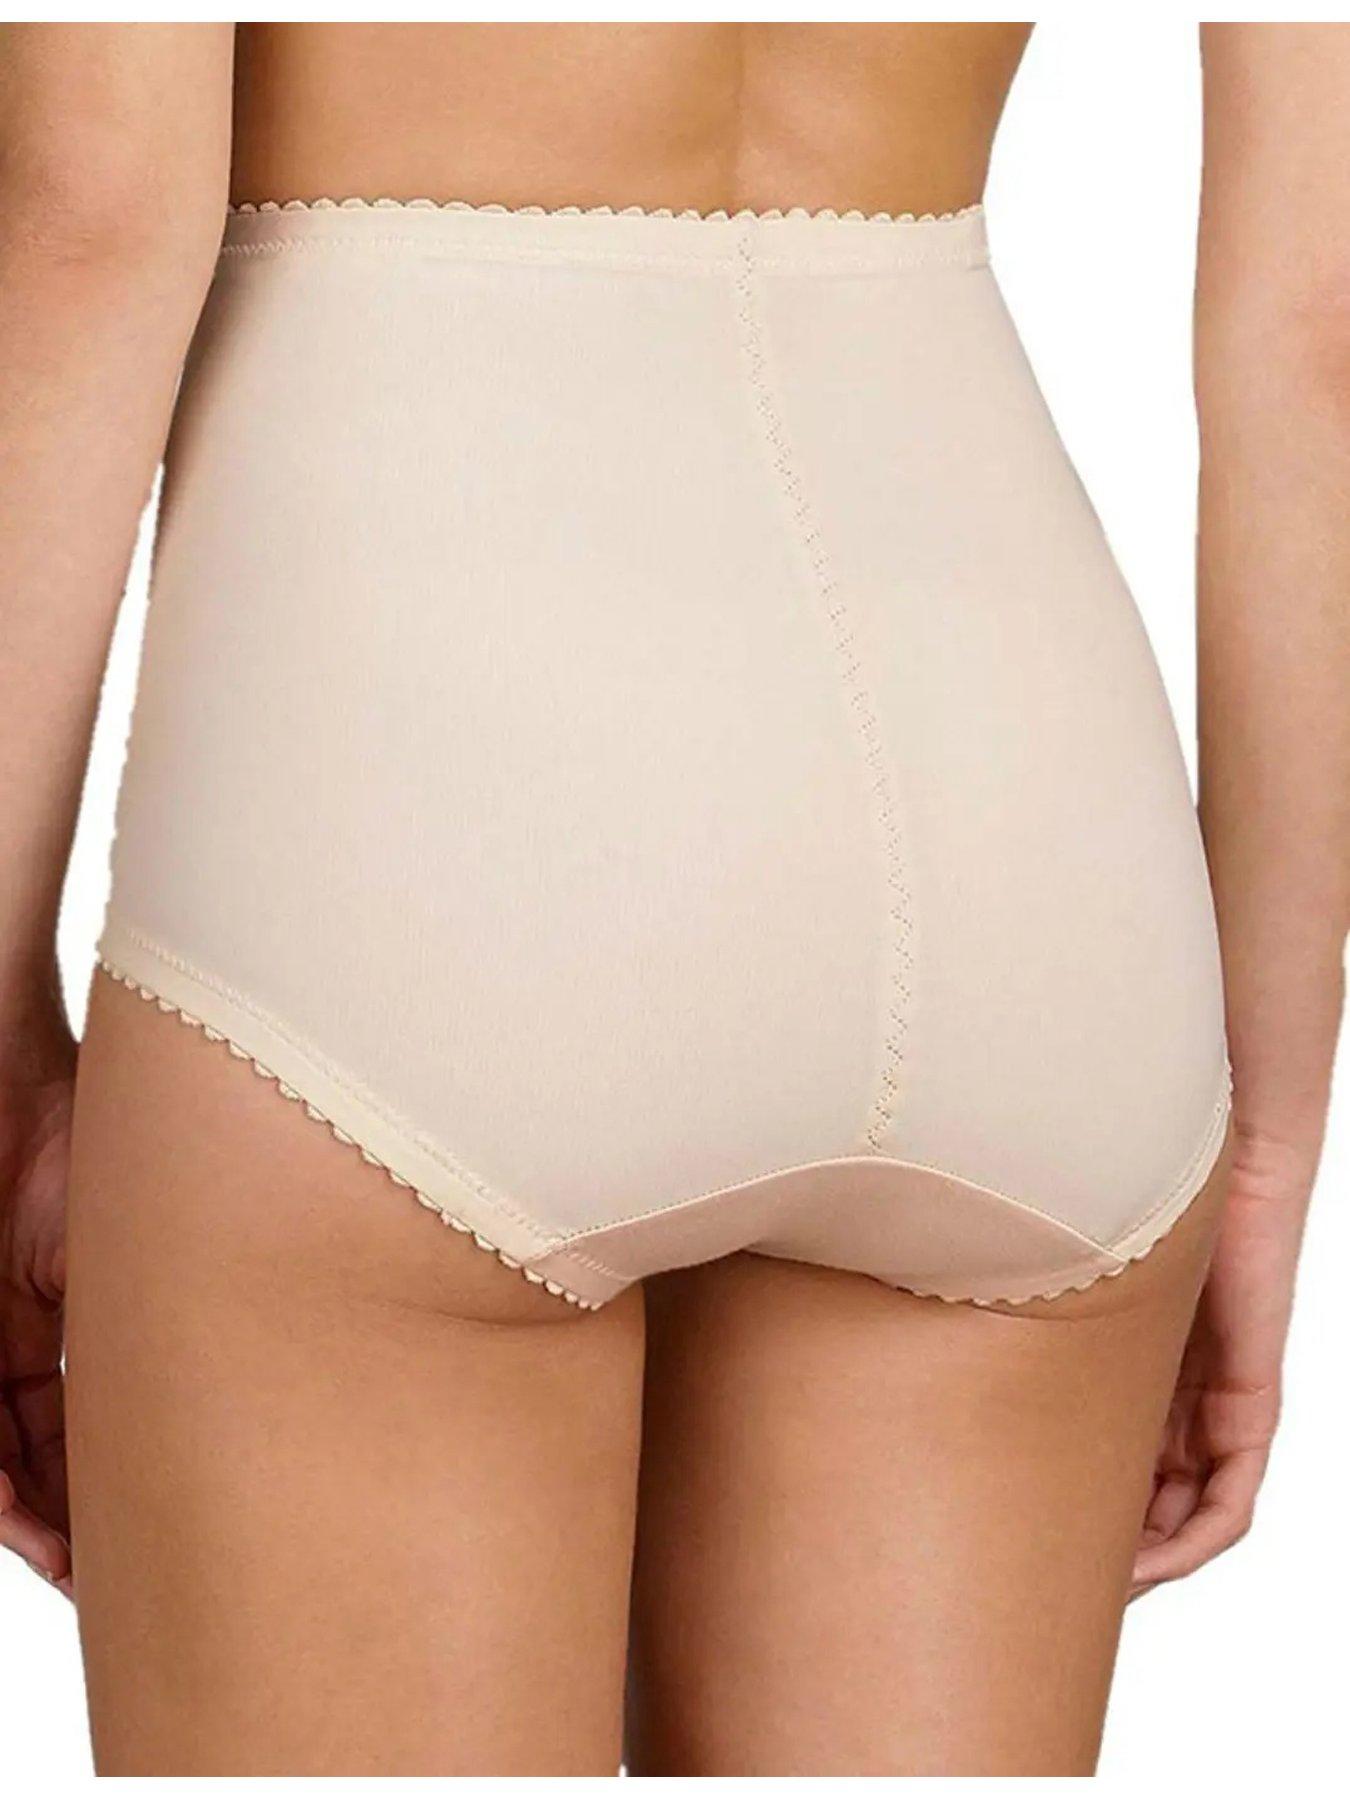 I Cant Believe It's A Girdle - Beige